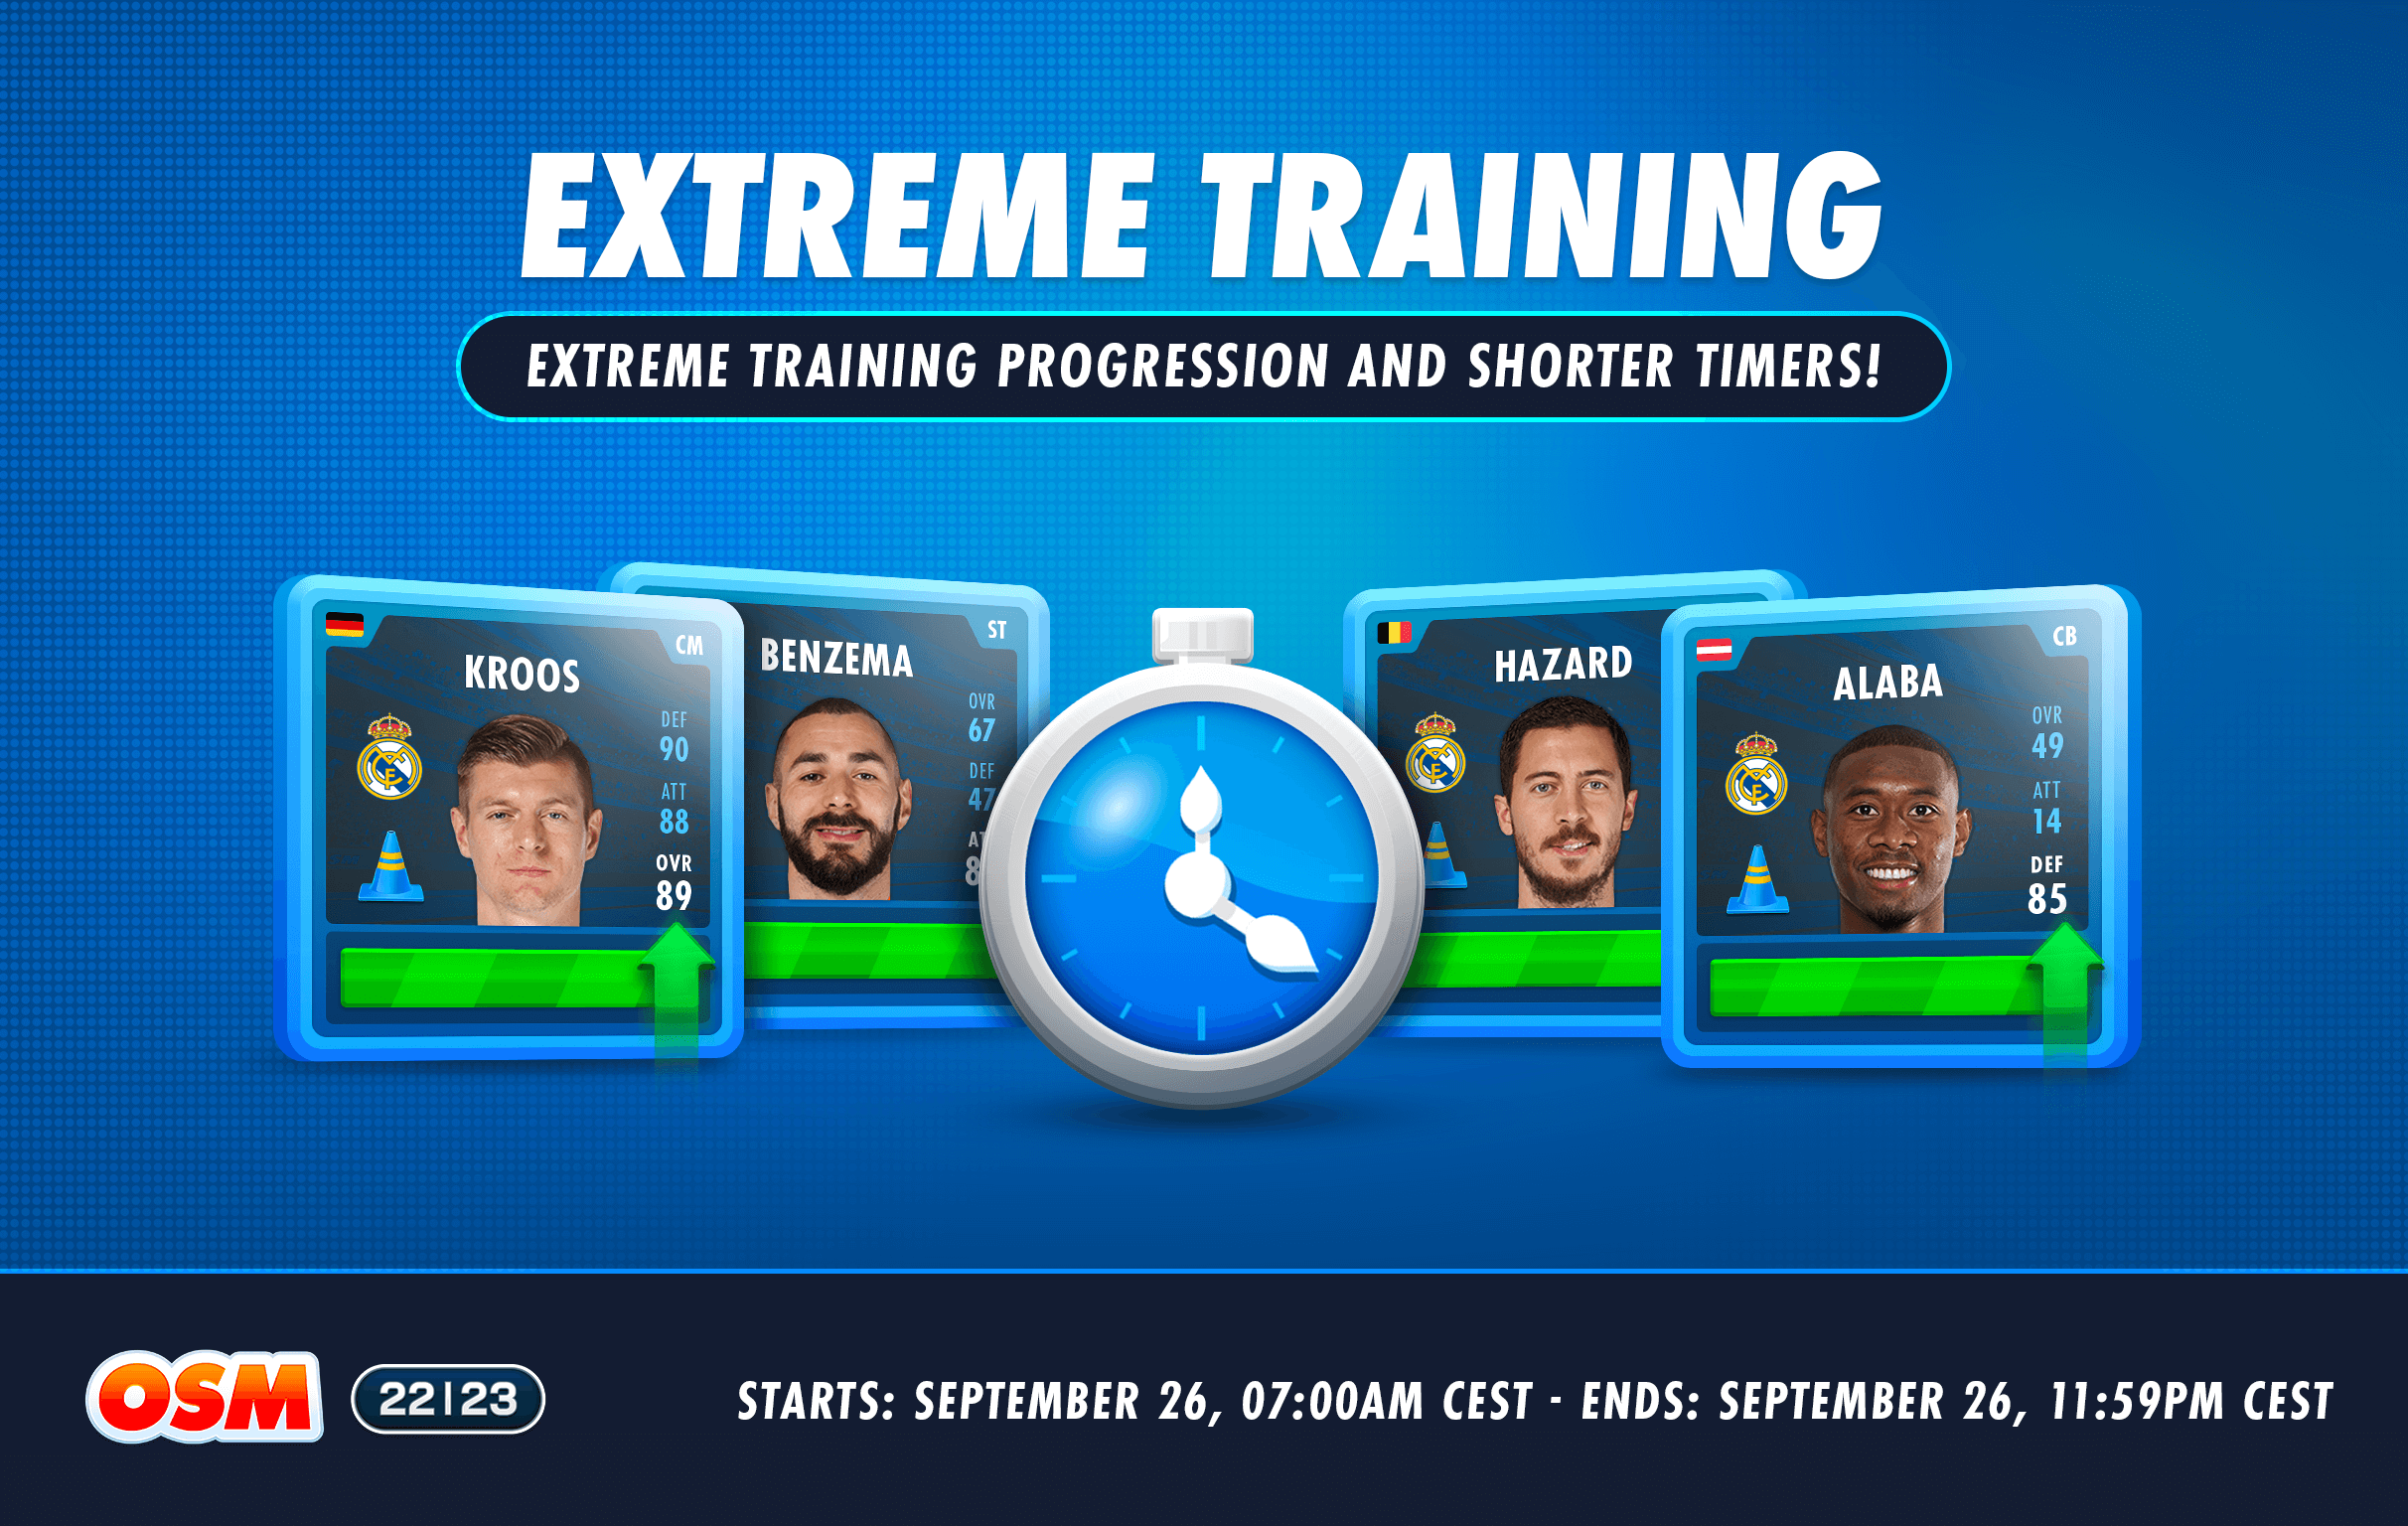 Forum_Extreme Training.png